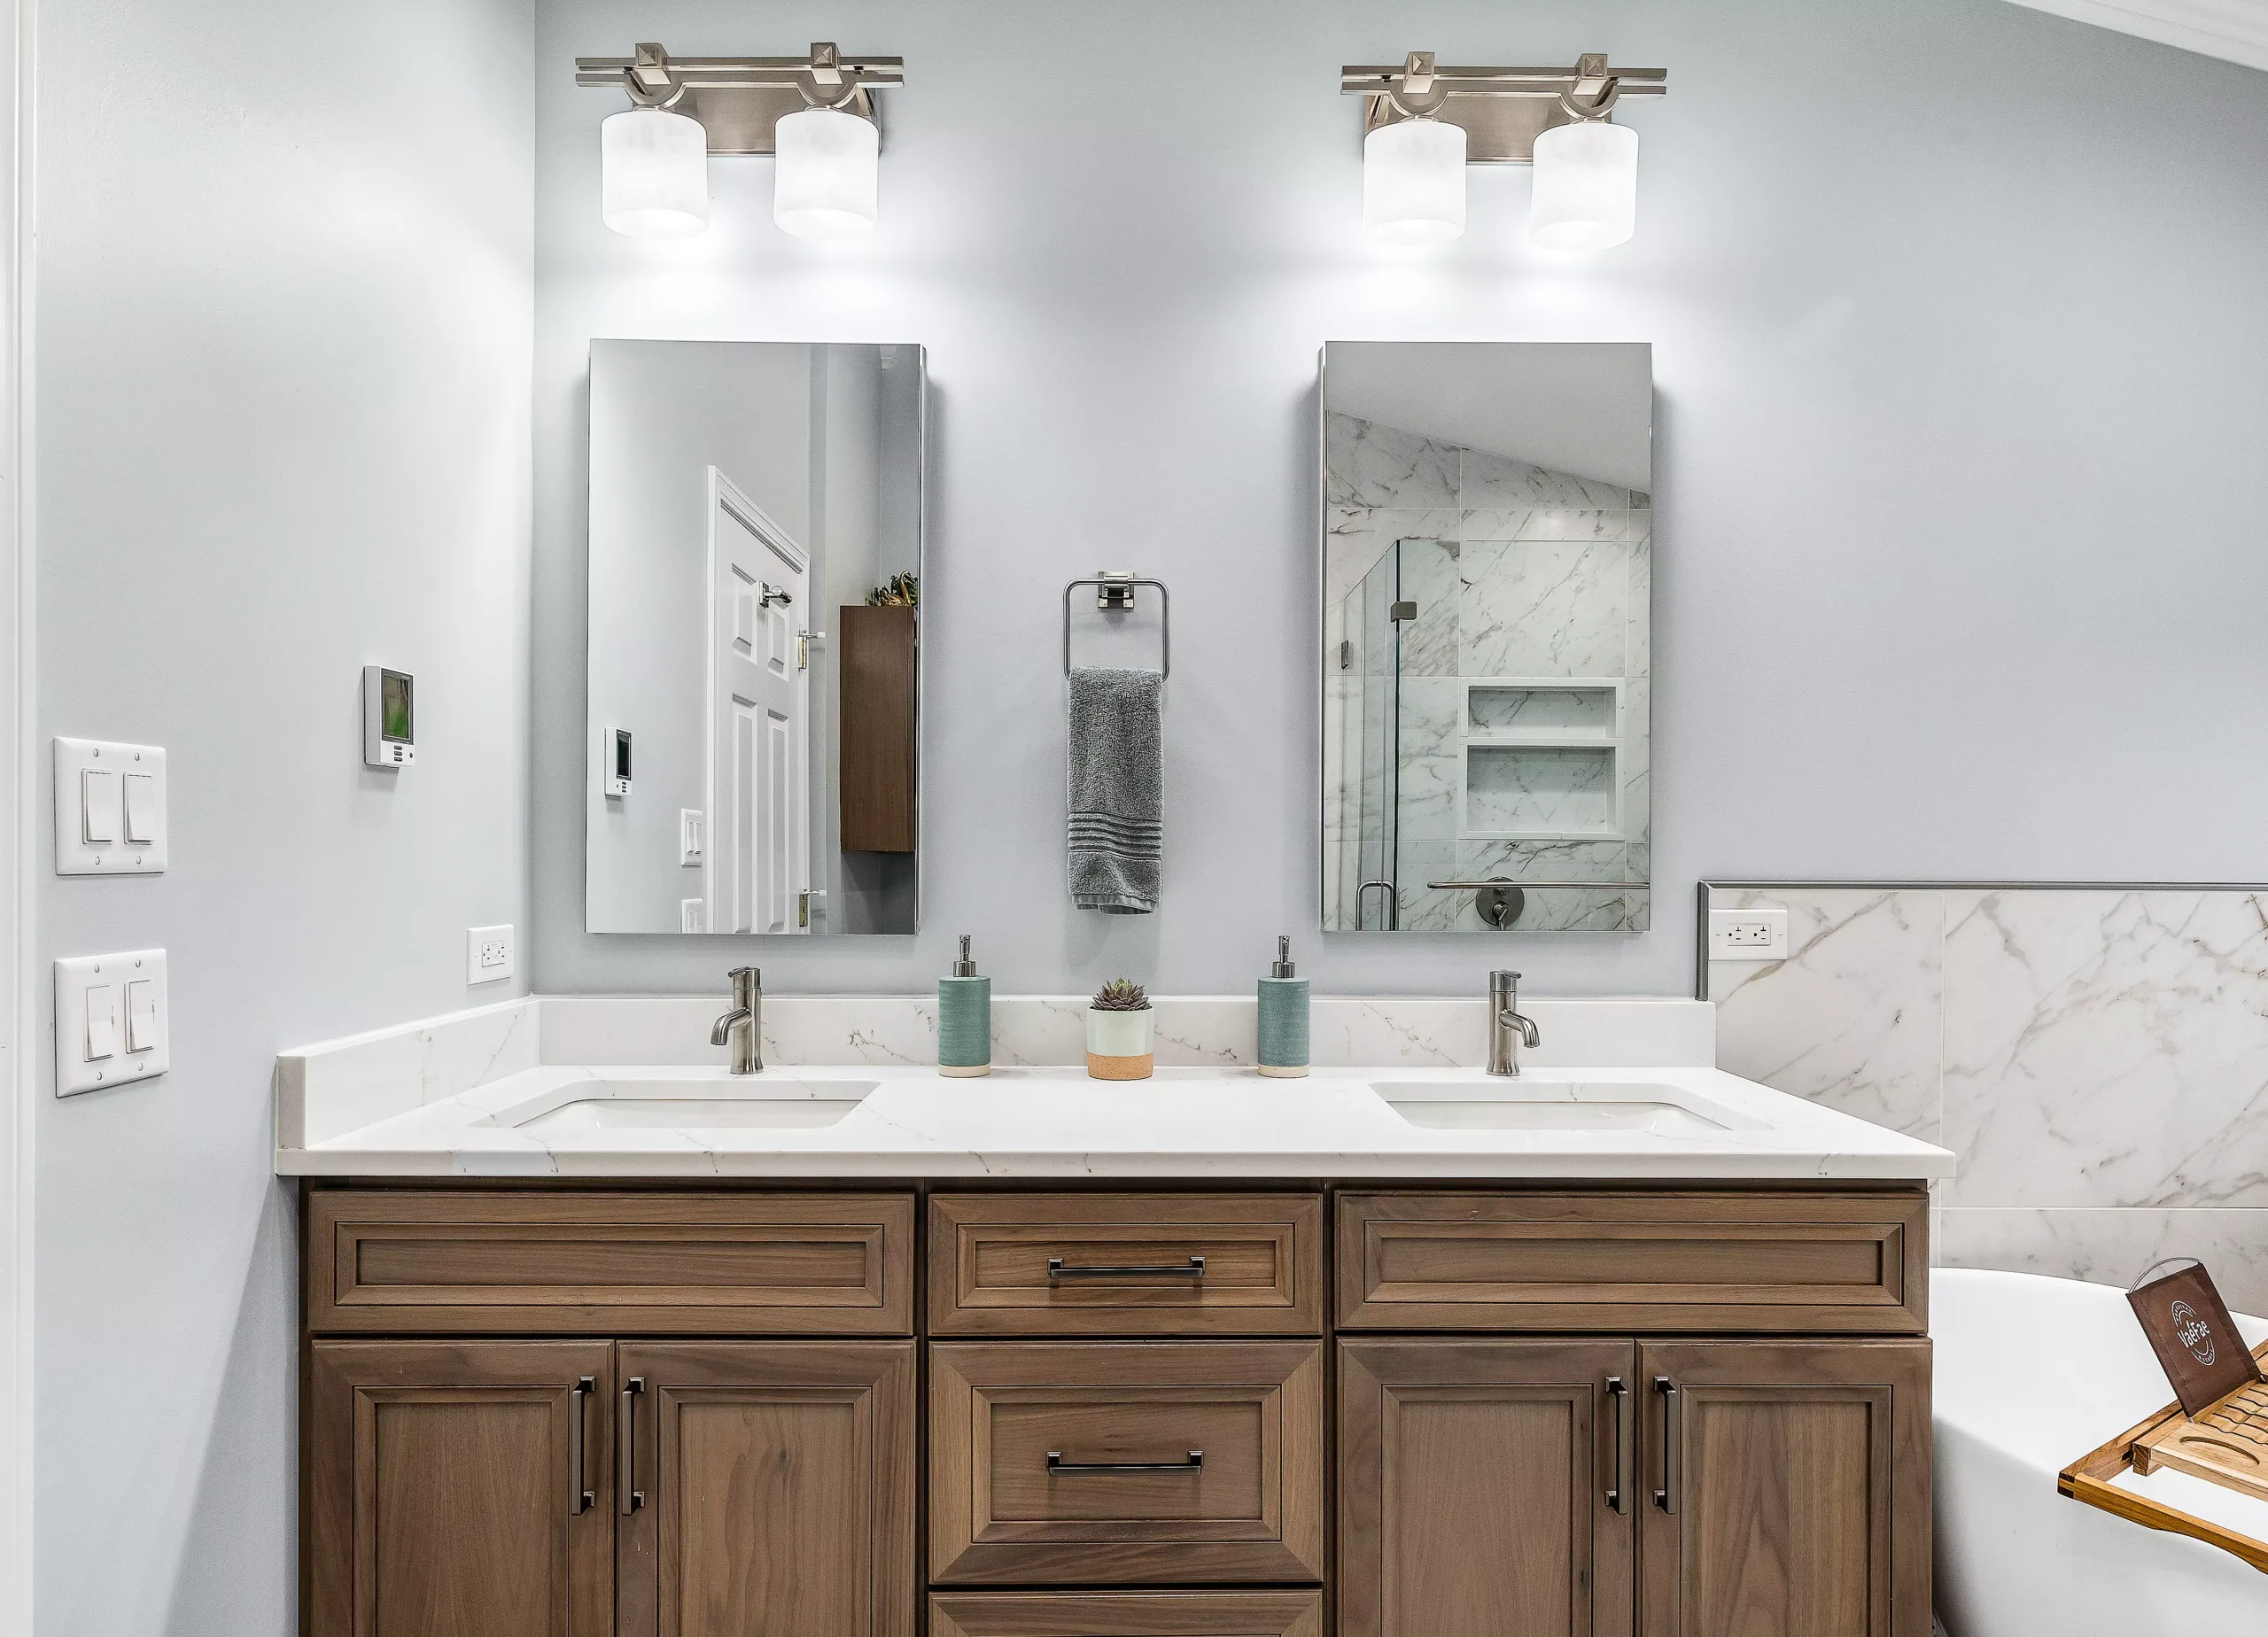 A bathroom with two sinks and two mirrors, perfect for a home renovation project.